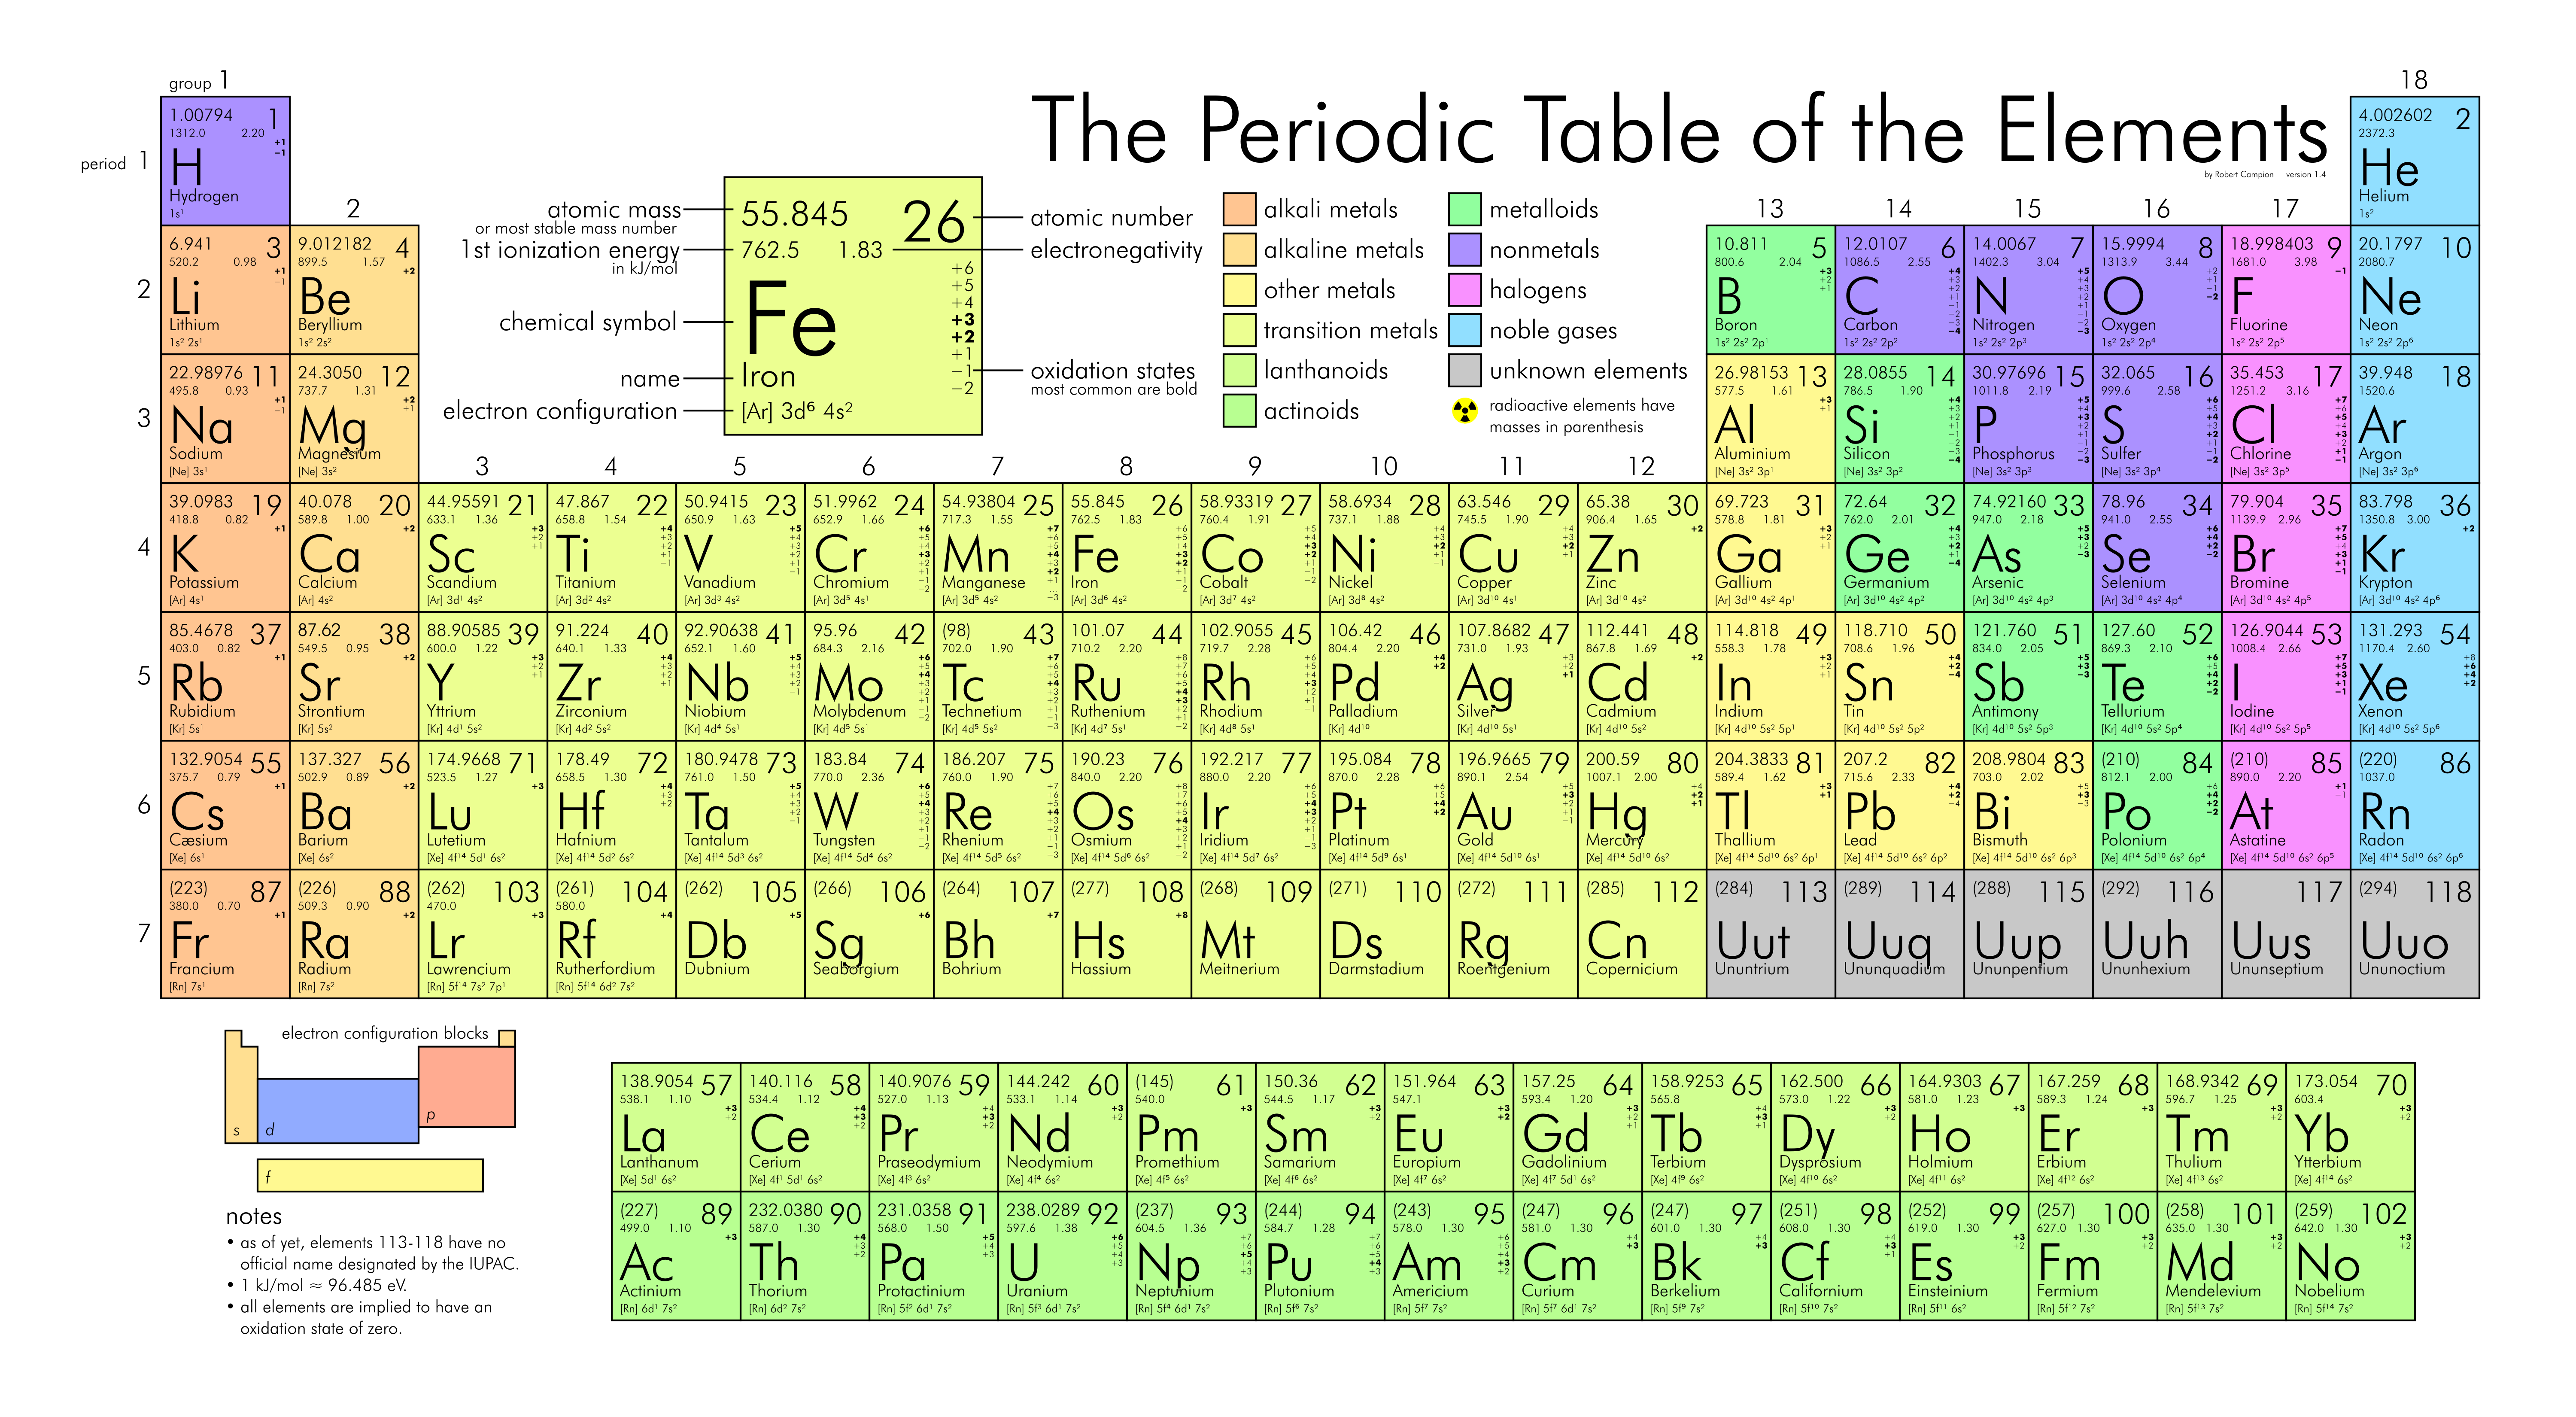 The Periodic Table of Elements as described in the text.